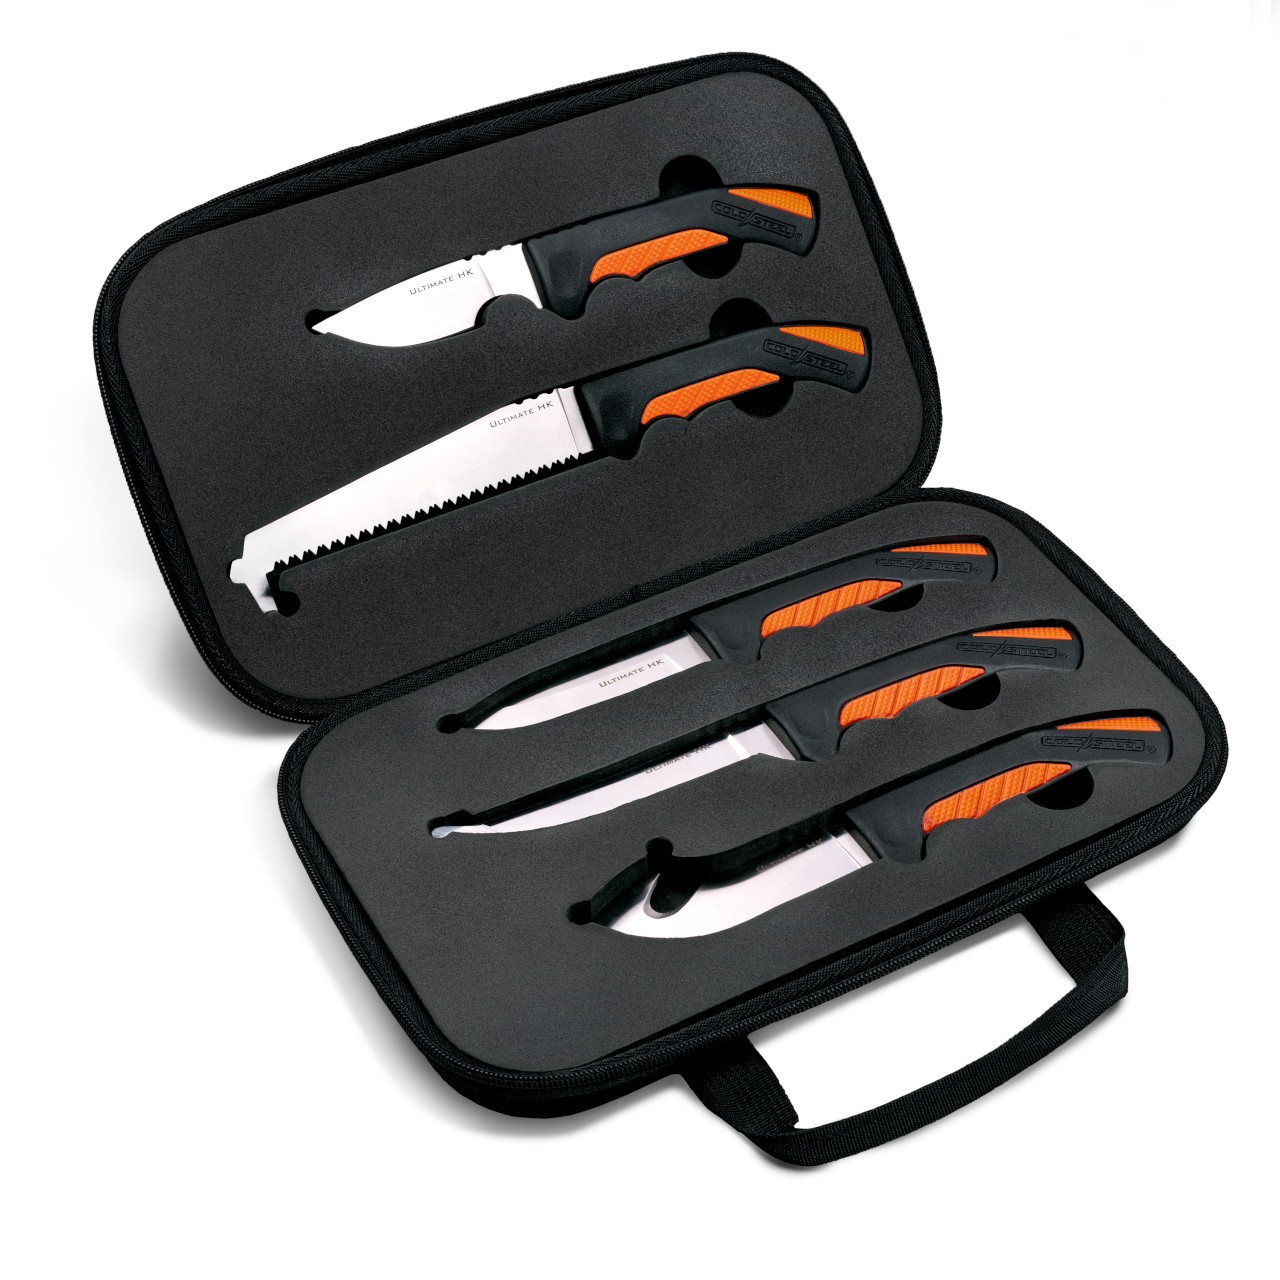 Cold Steel - Fixed blade hunting knife set - 5 knives